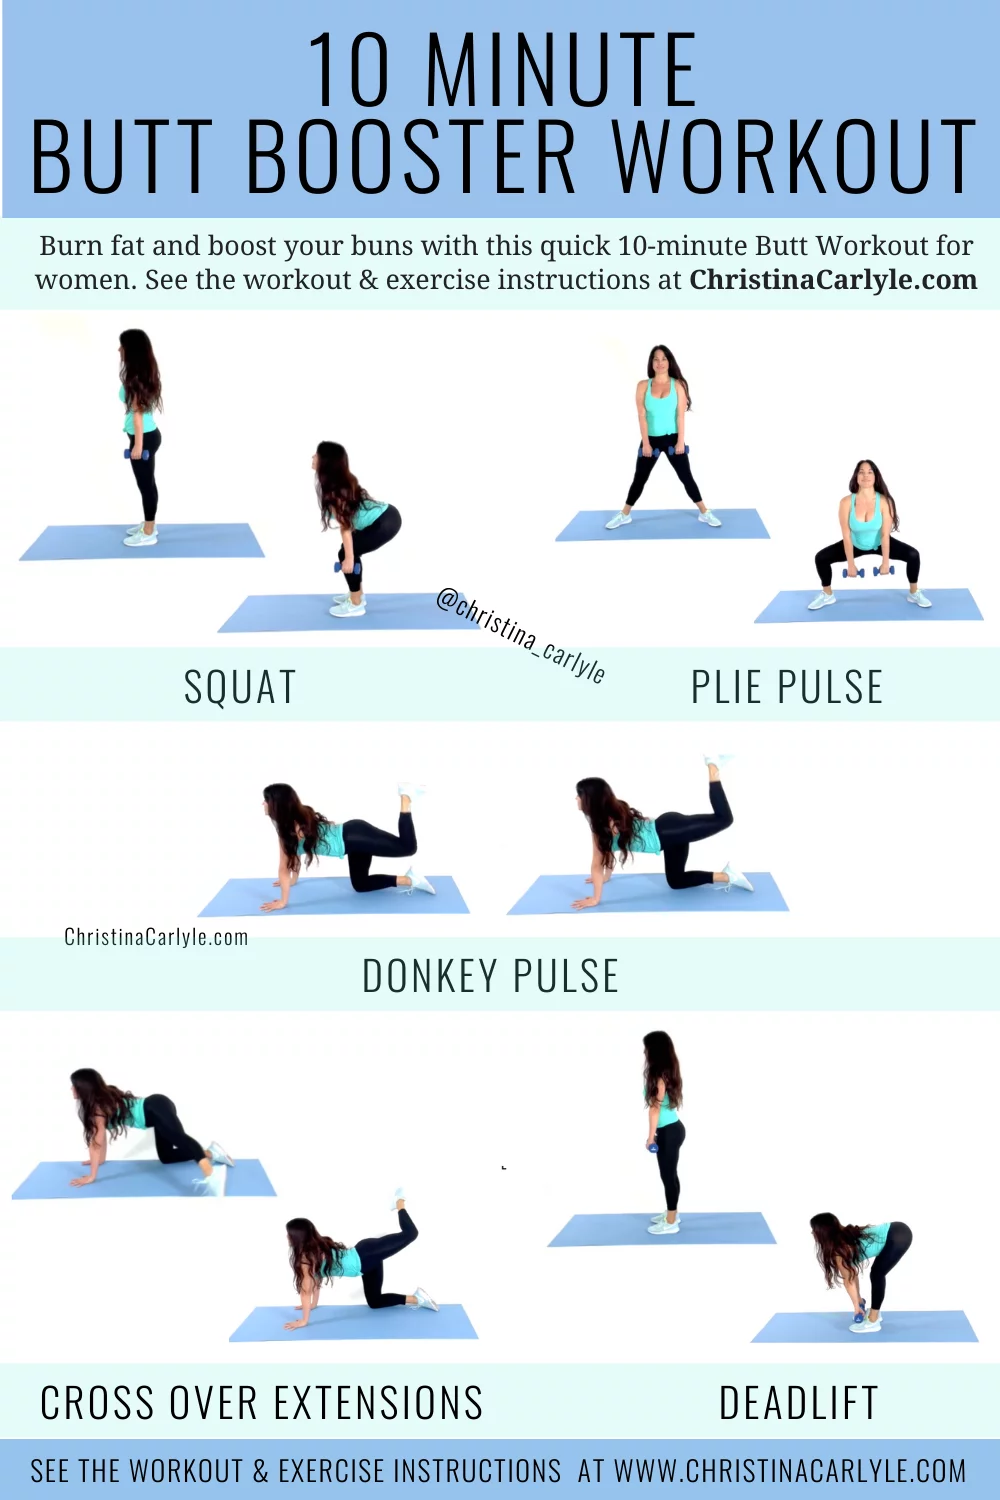 Trainer Christina Carlyle doing a 10 minute butt workout with 5 butt exercises and text that says 10 minute Butt Workout for Women